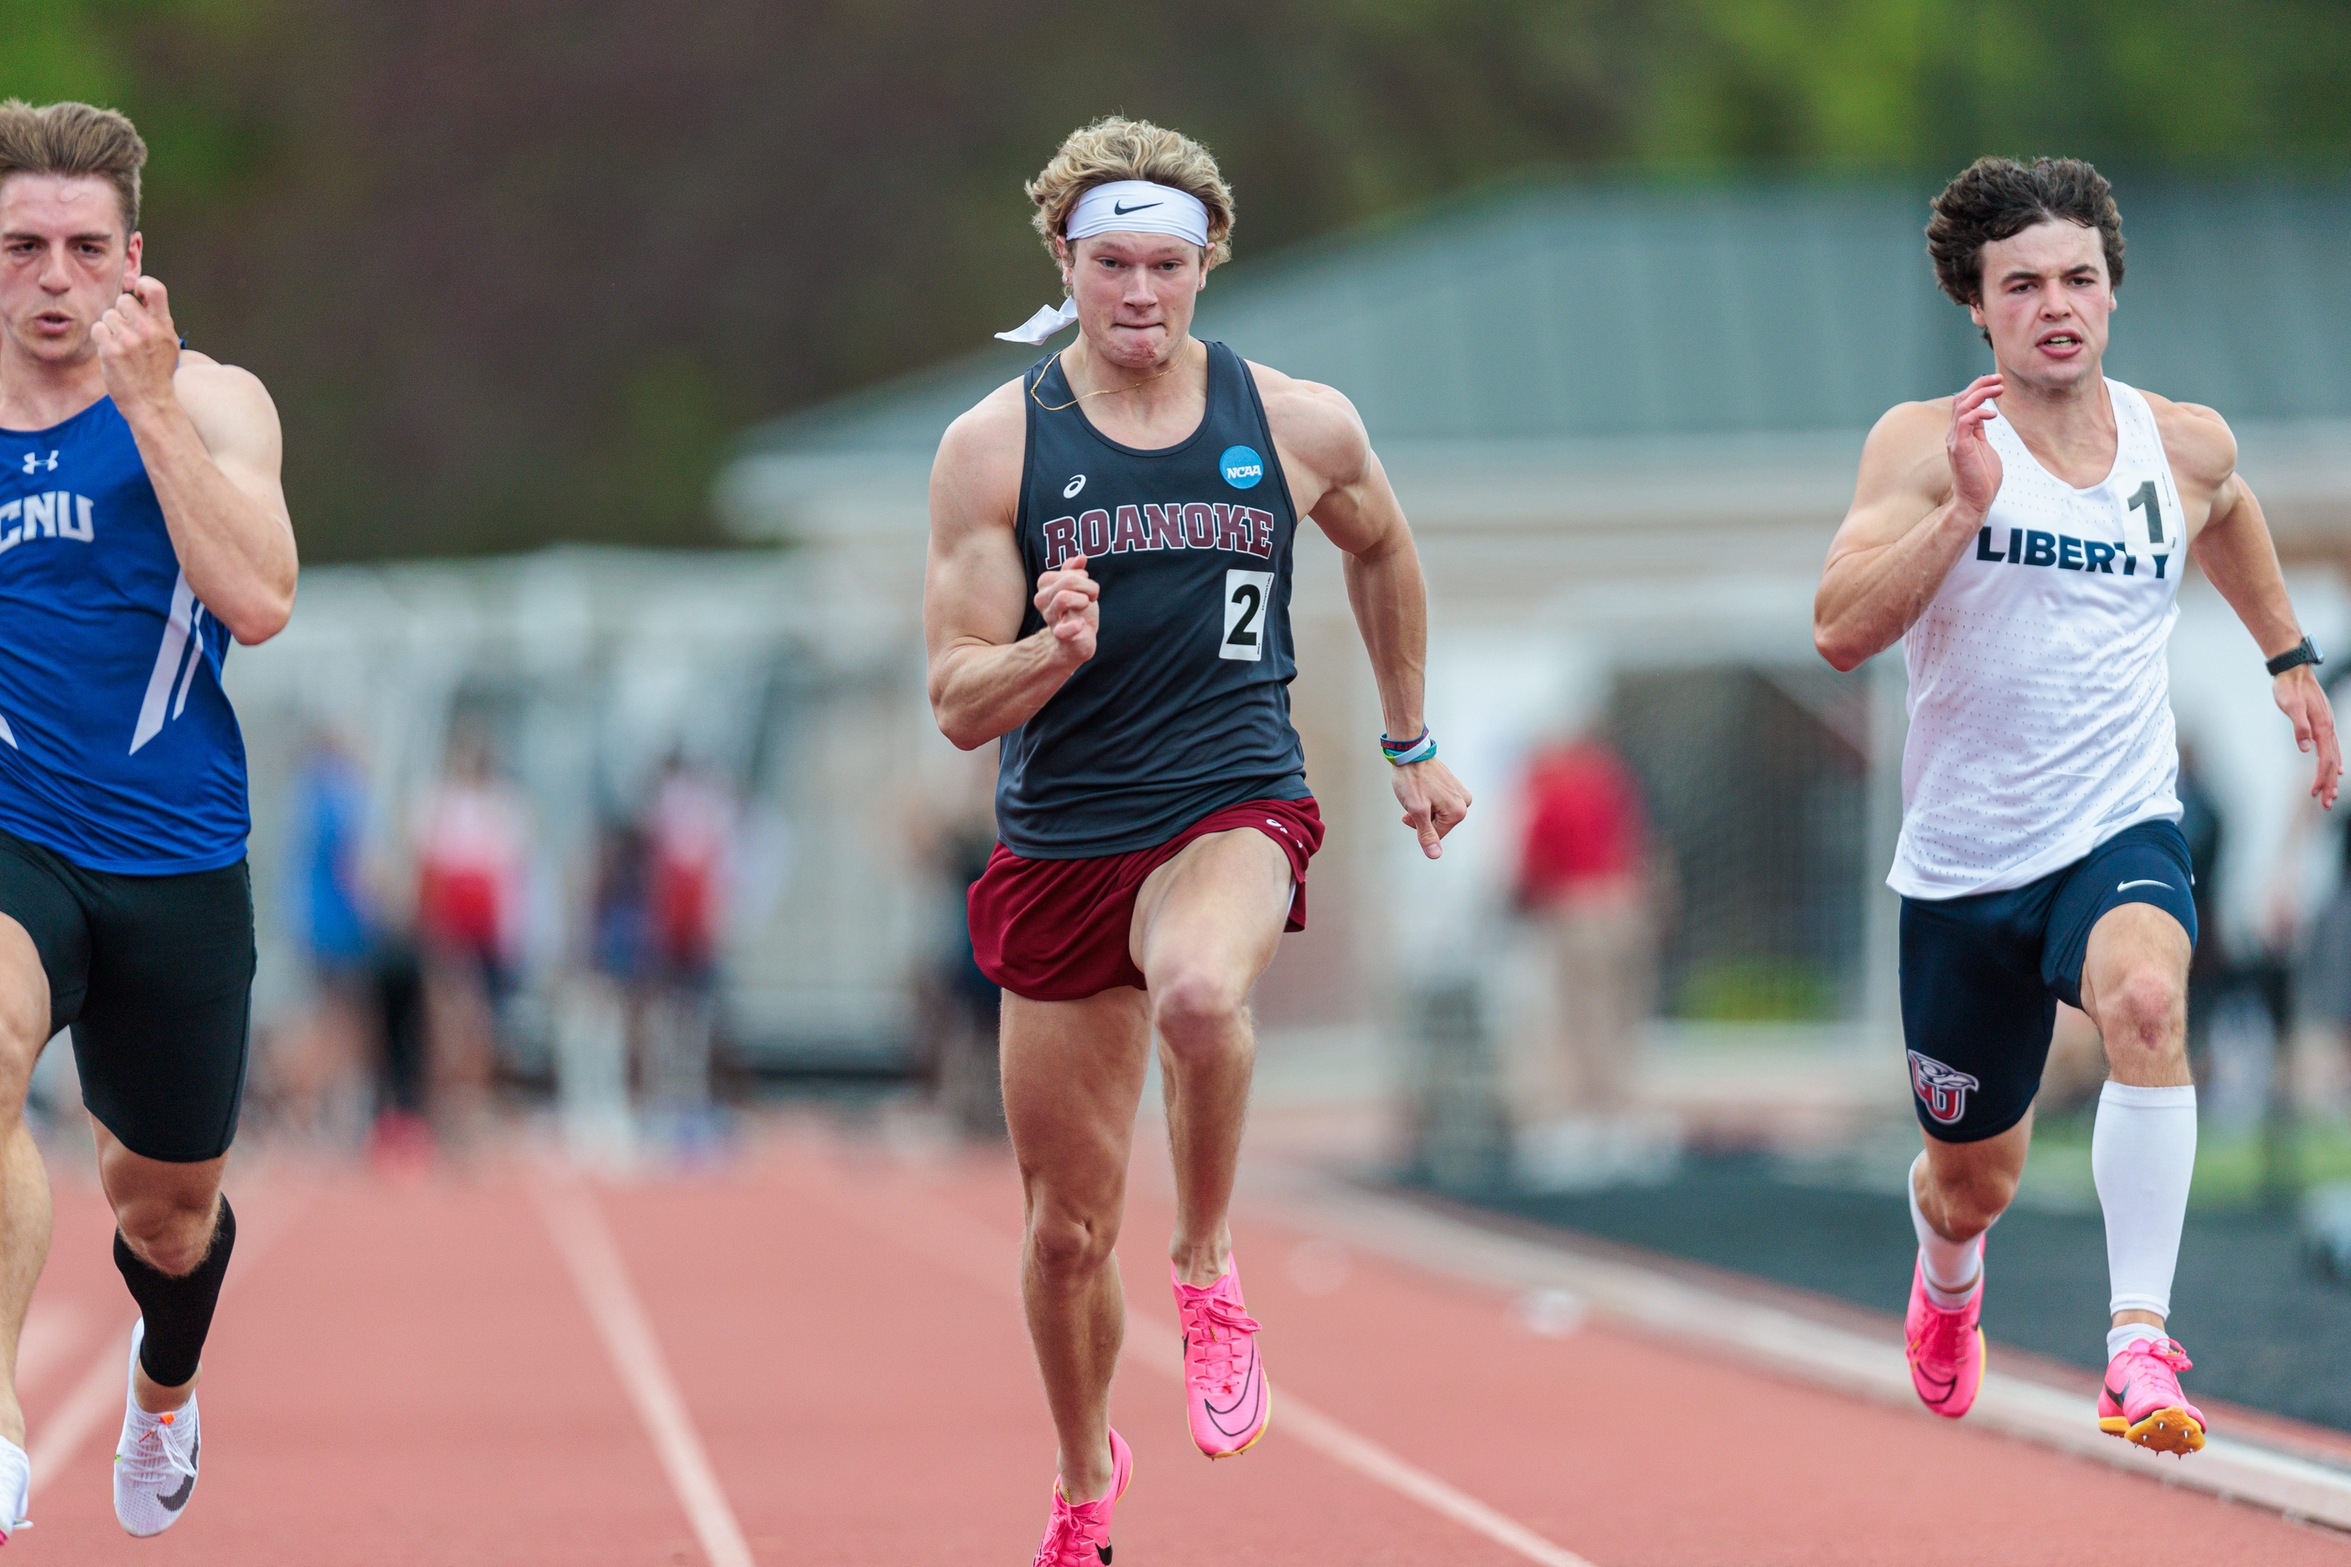 Roanoke Dominates Sprints, Places 4th at ODAC Meet